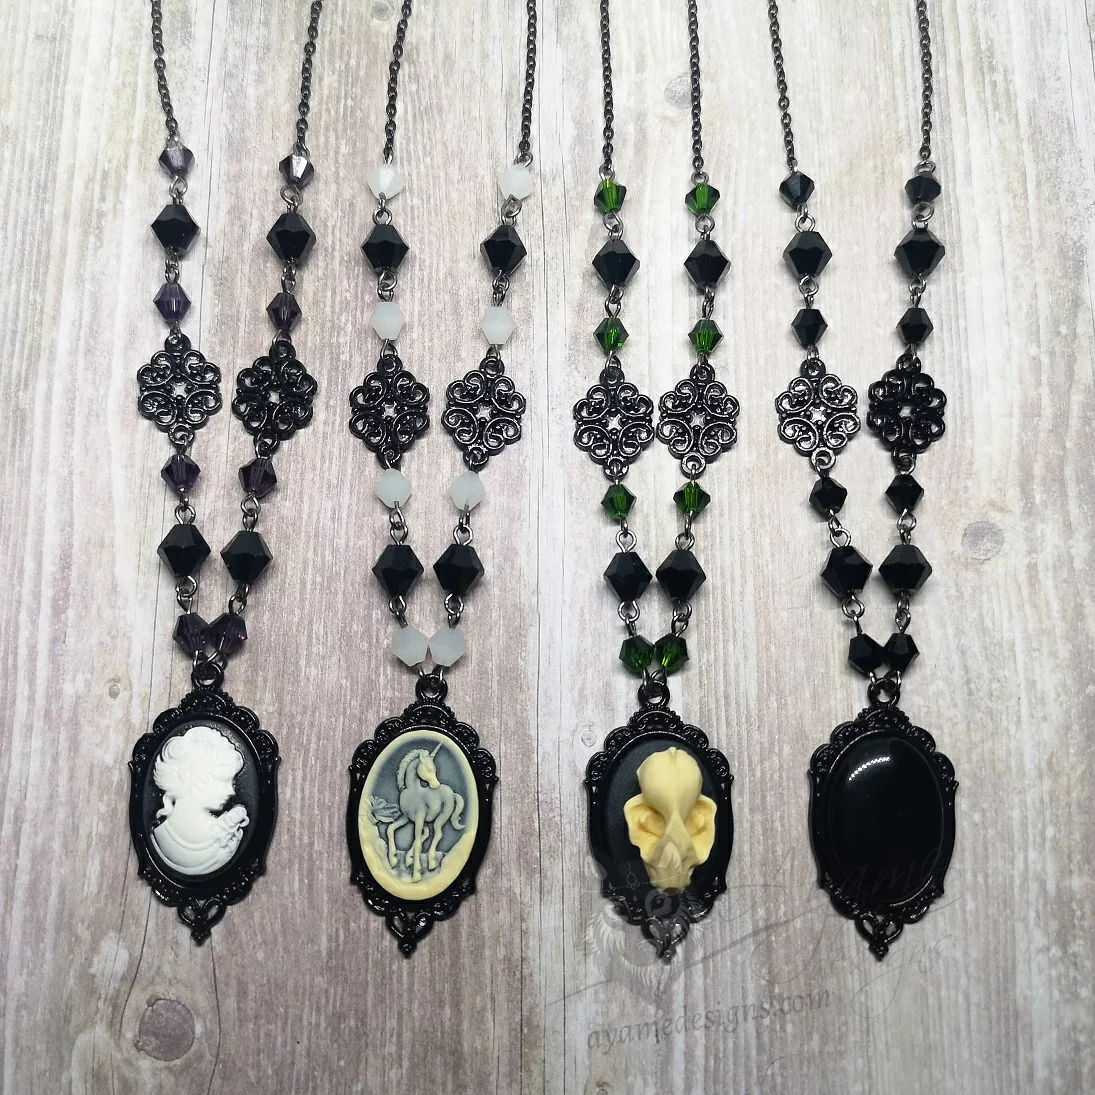 Handmade gothic necklace with a small resin cameo in a black filigree frame, Austrian crystal beads and black stainless steel chain